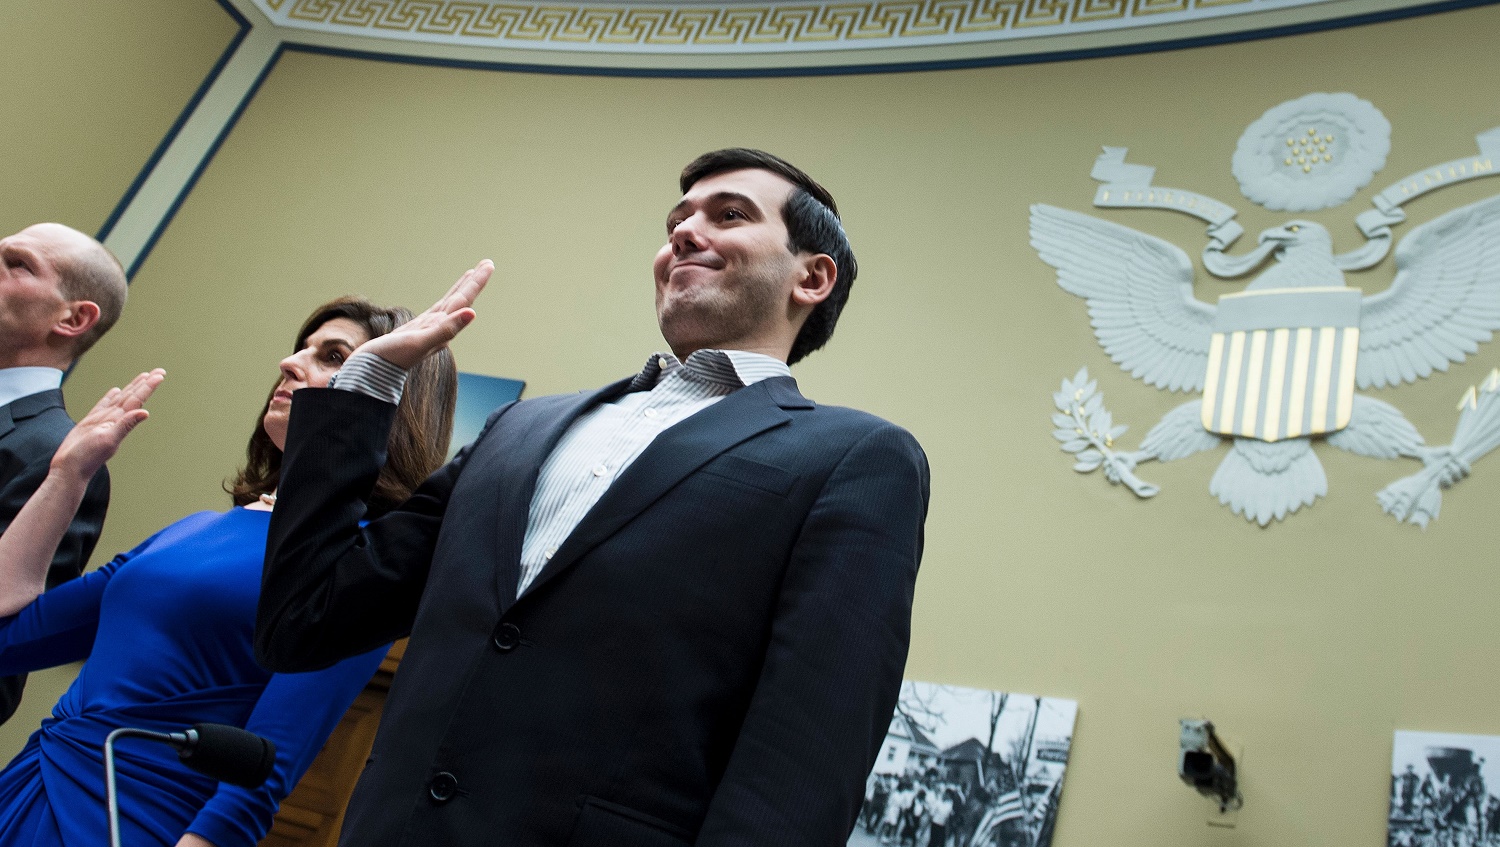 Entrepreneur and pharmaceutical executive Martin Shkreli (R) is sworn in with others during a hearing of the House Oversight and Government Reform Committee on Capitol Hill February 4, 2016 in Washington, DC. Martin Shkreli, the controversial former pharmaceuticals boss and hedge fund manager indicted on securities fraud charges, has been subpoenaed to appear at a hearing of a House of Representatives committee on oversight and government reform looking at the prescription drug market. / AFP / Brendan Smialowski        (Photo credit should read BRENDAN SMIALOWSKI/AFP/Getty Images)